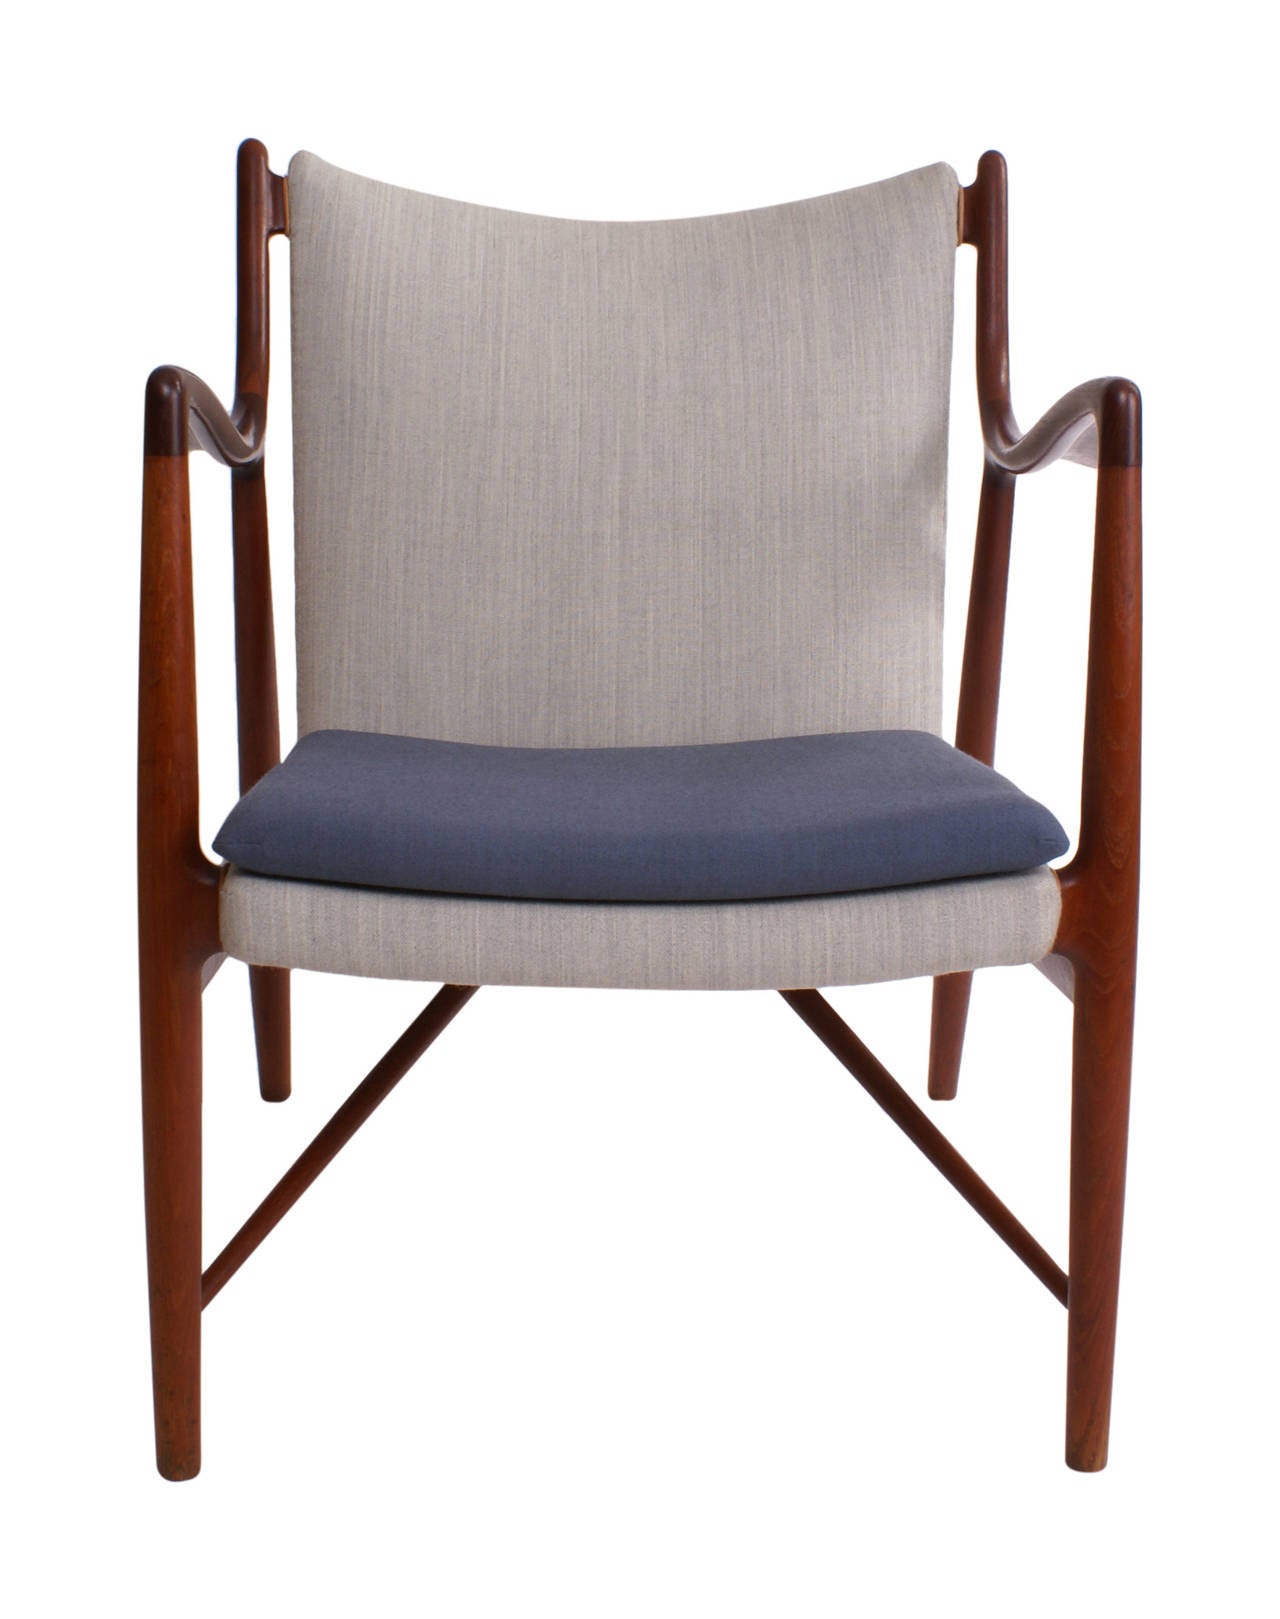 Finn Juhl NV45 easy chair made by master cabinetmaker Niels Vodder. Chair is in teak and stamped from Niels Vodder.

Presented at the Copenhagen Cabinetmakers' Guild Exhibition in 1945.

Literature: Grete Jalk [ed.], 